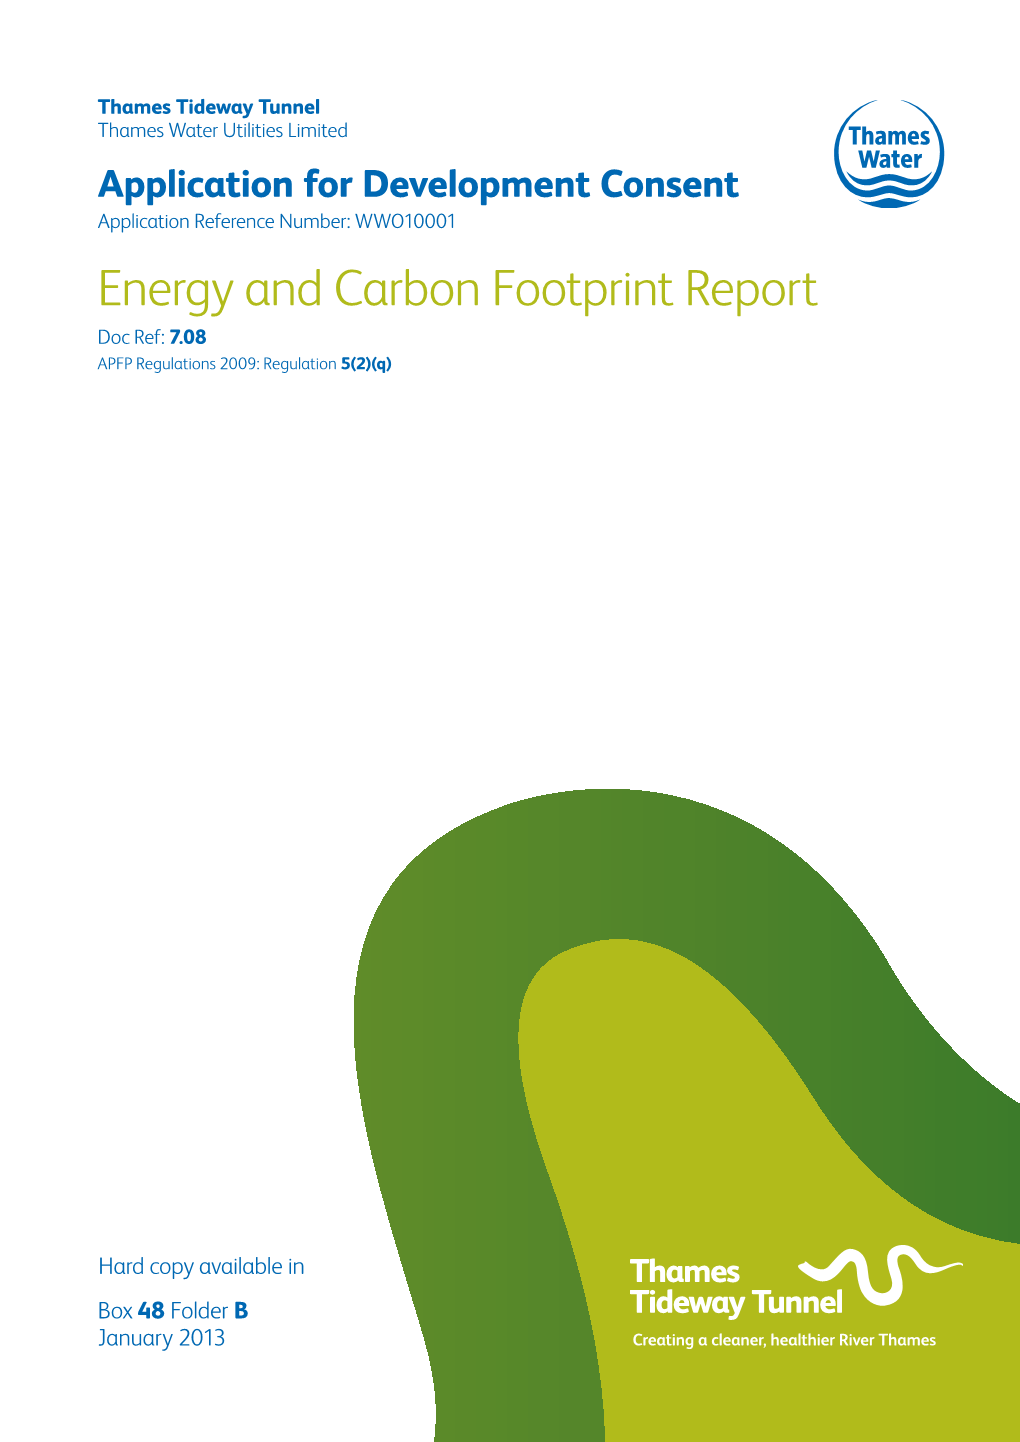 Thames Tideway Tunnel Energy and Carbon Footprint Report